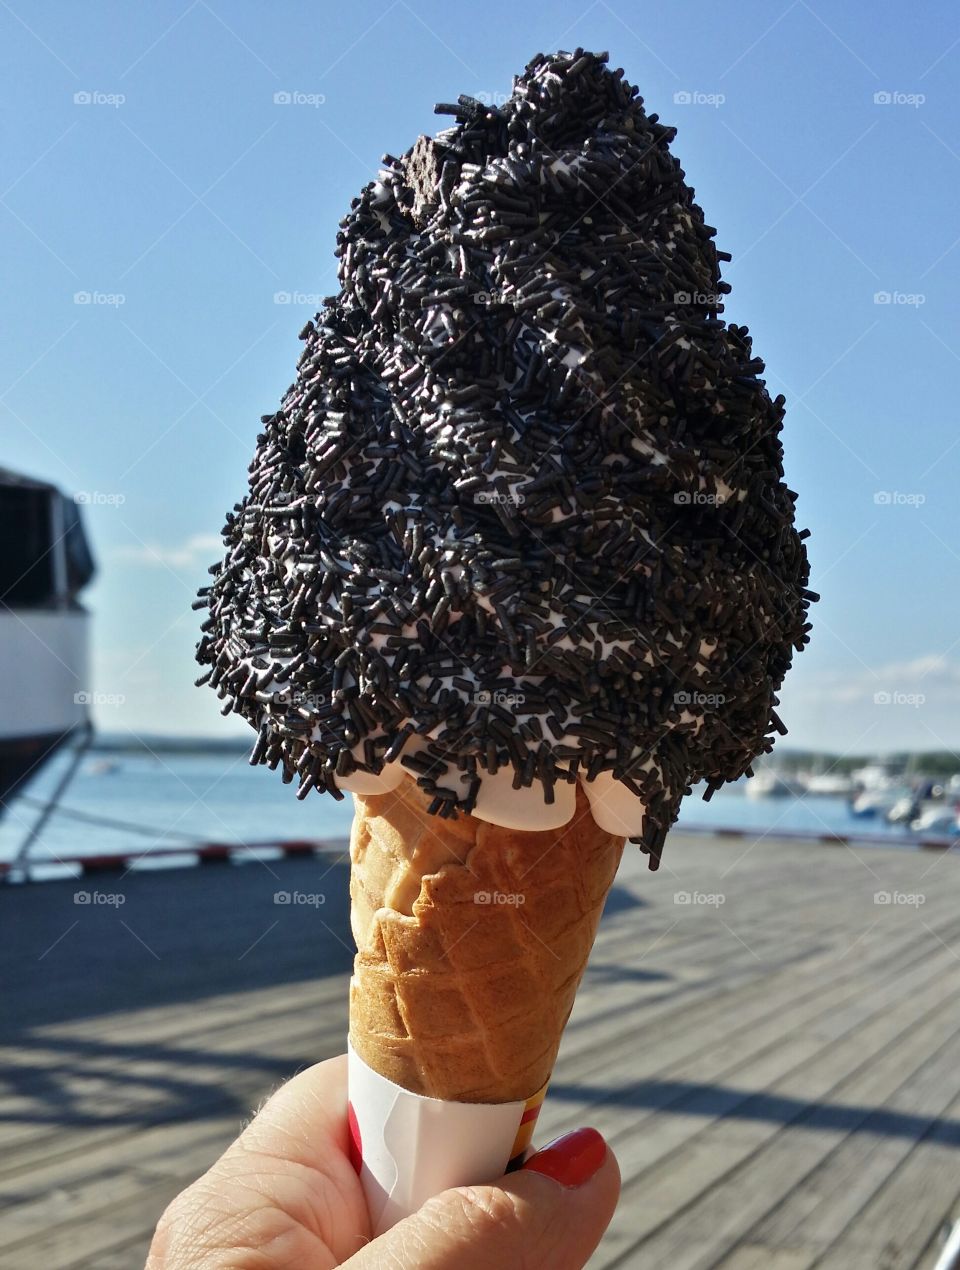 Icecream with licorice. 23 degrees in Norway, icecream is a must